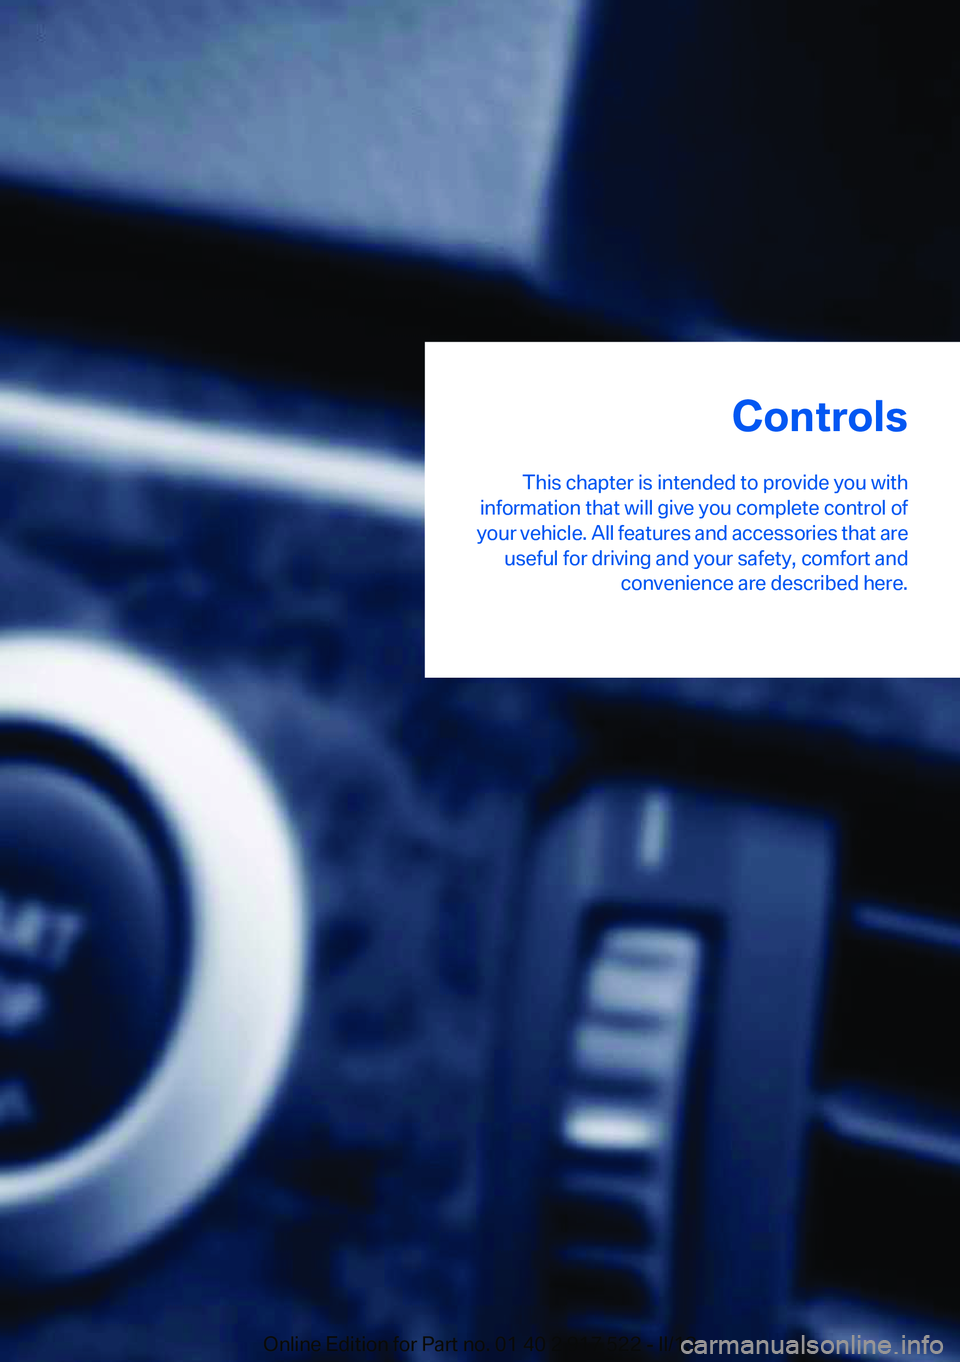 BMW 528I XDRIVE 2013 Owners Manual Controls
This chapter is intended to provide you with
information that will give you complete control of
your vehicle. All features and accessories that are useful for driving and your safety, comfort